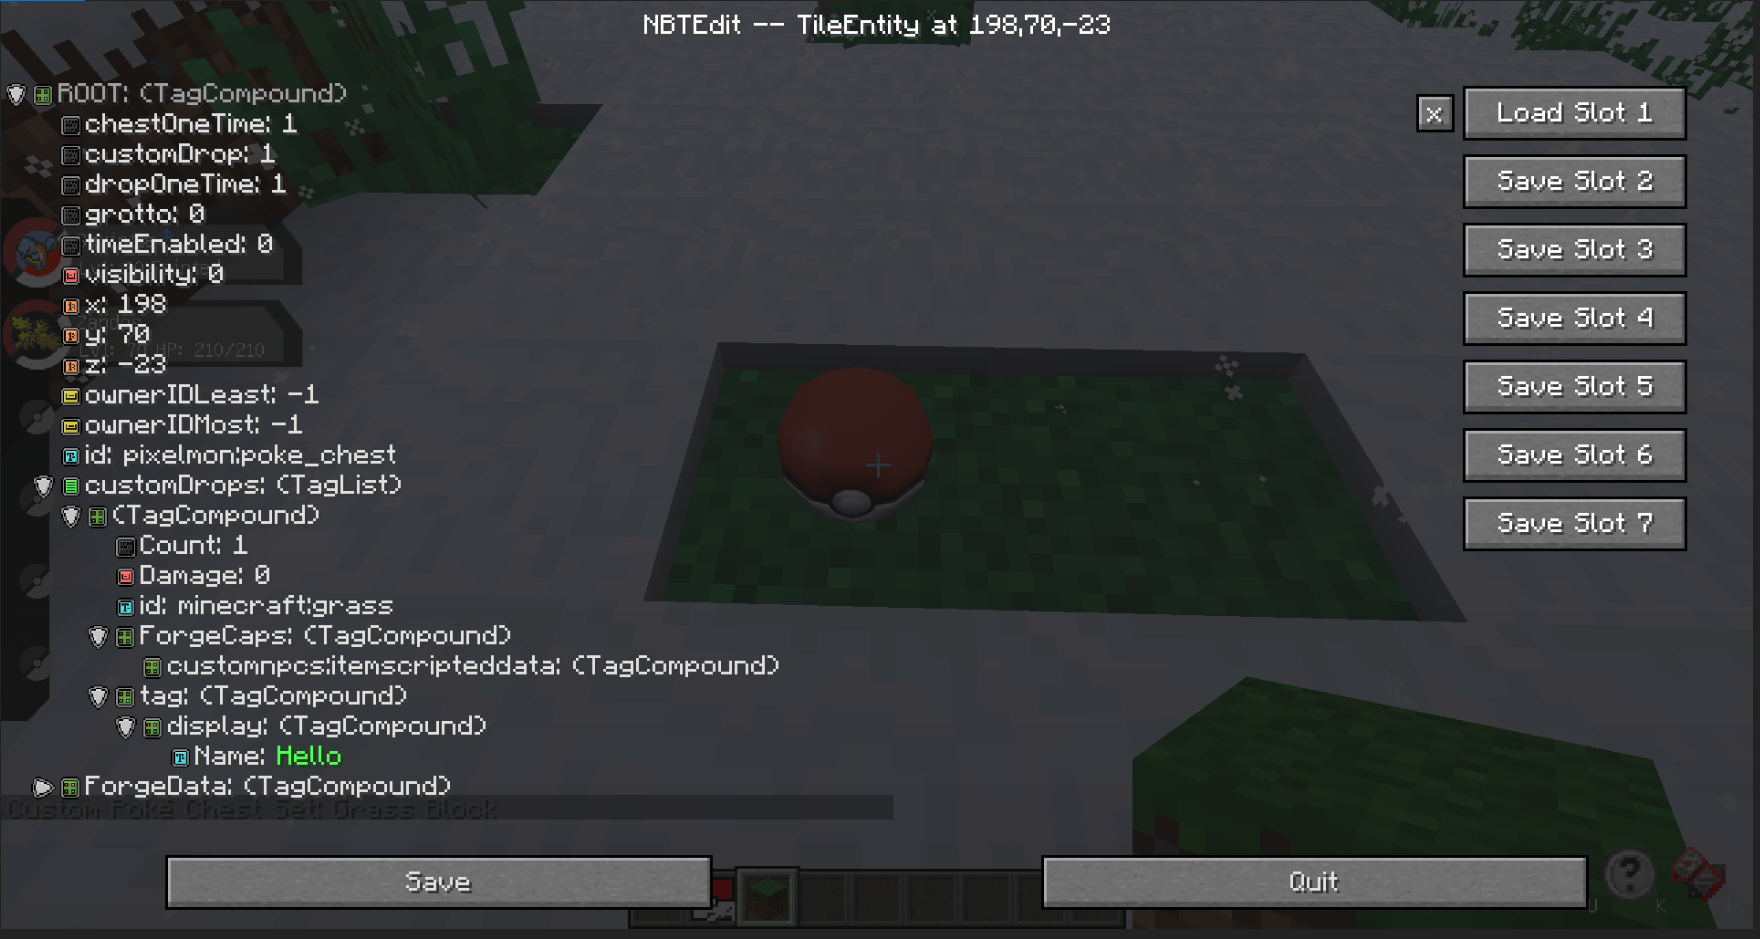 Pixelmon Mod Bugs - Pixelmon Mod - Bug tracker - Ticket #13069 - [7.0.0]  Natu model invisible/completely missing from the game.